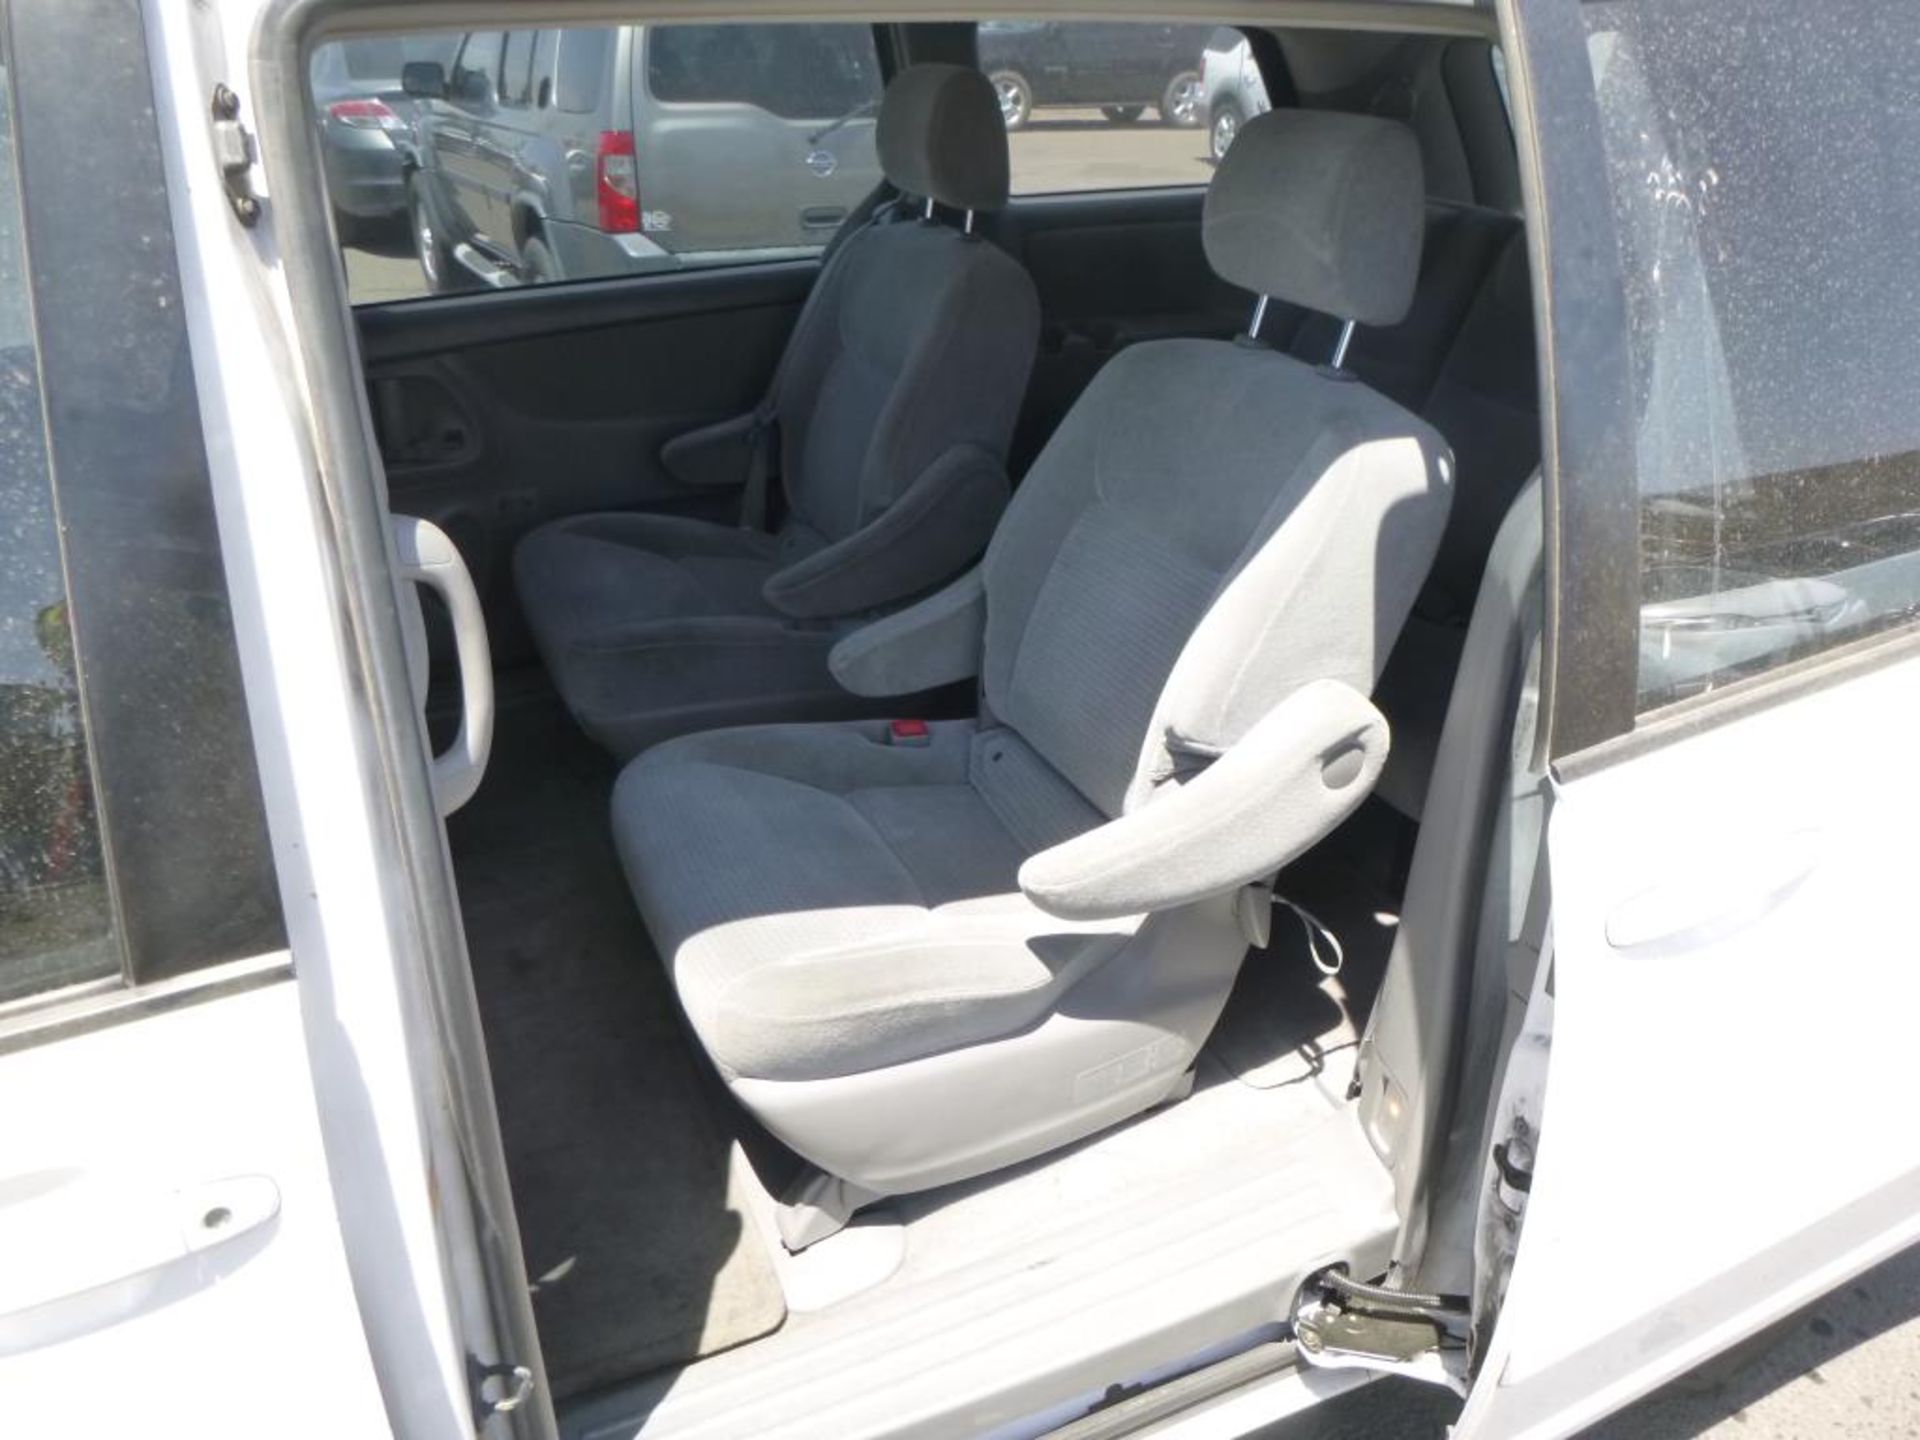 (Lot # 3451) 2006 Toyota Sienna - Image 9 of 13